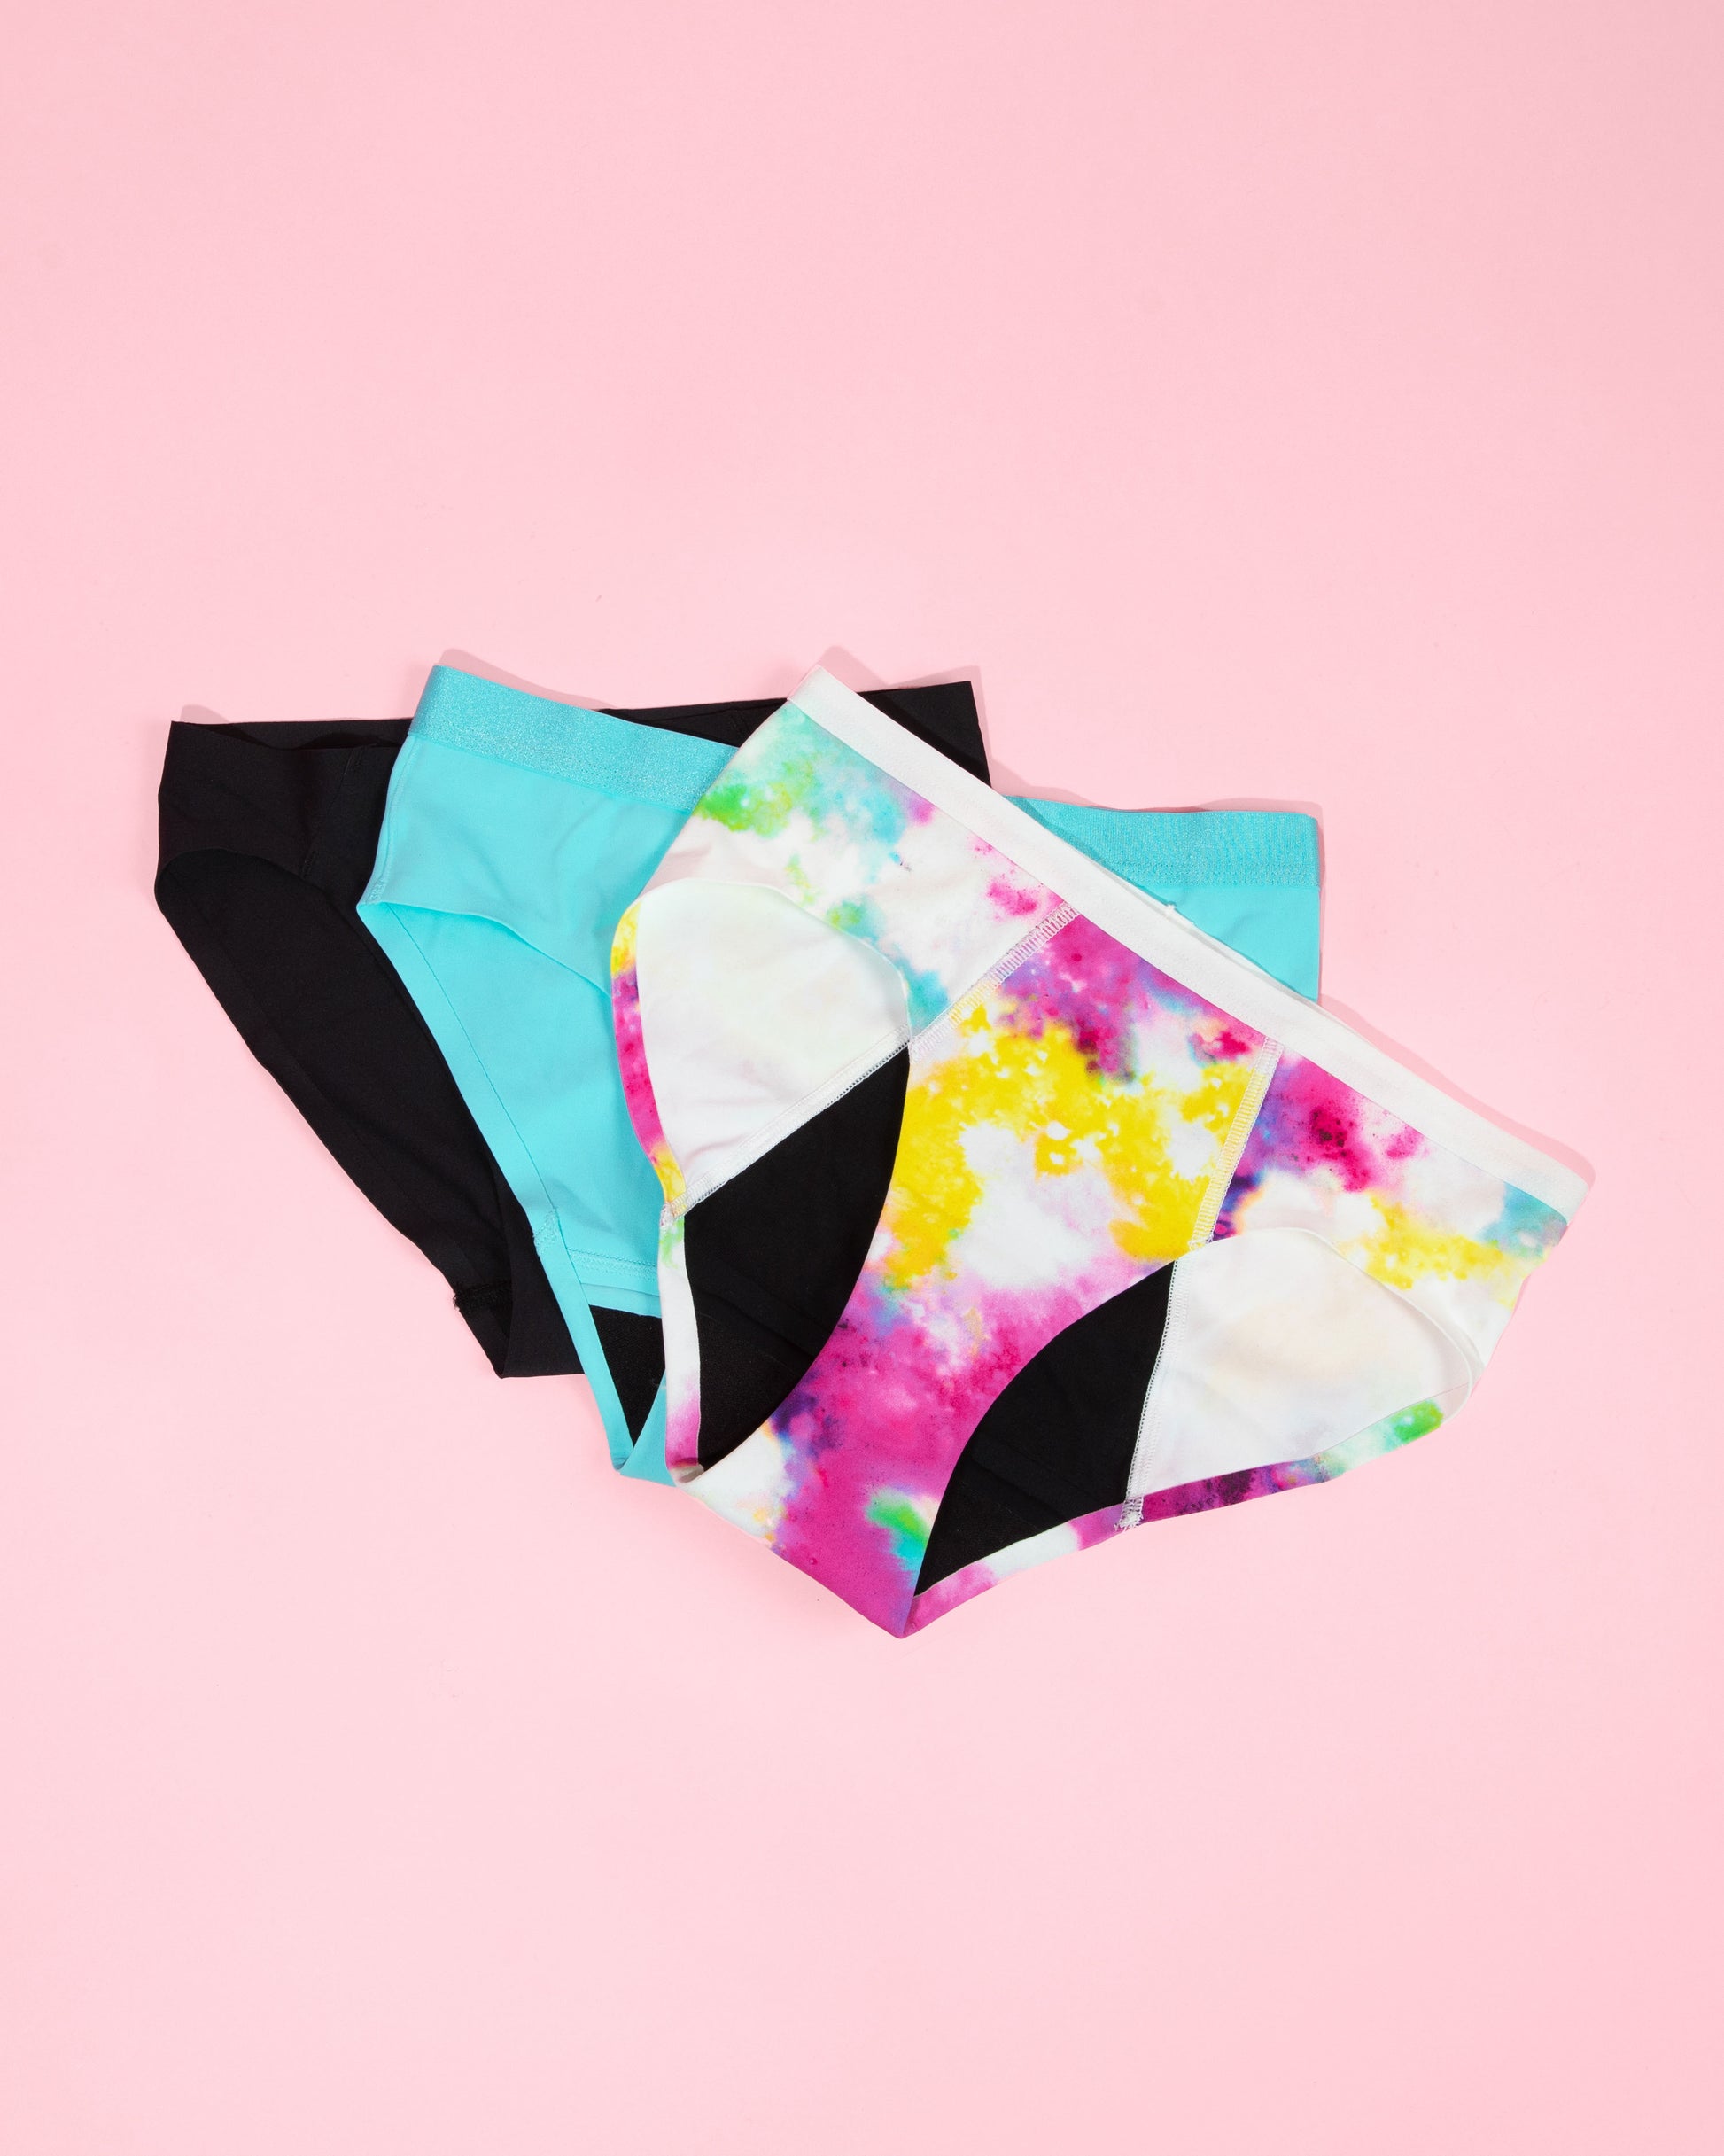 Period panties for women & teens. No Pad, Cup or Tampon Required. #fashion  #femininehygieneproducts 